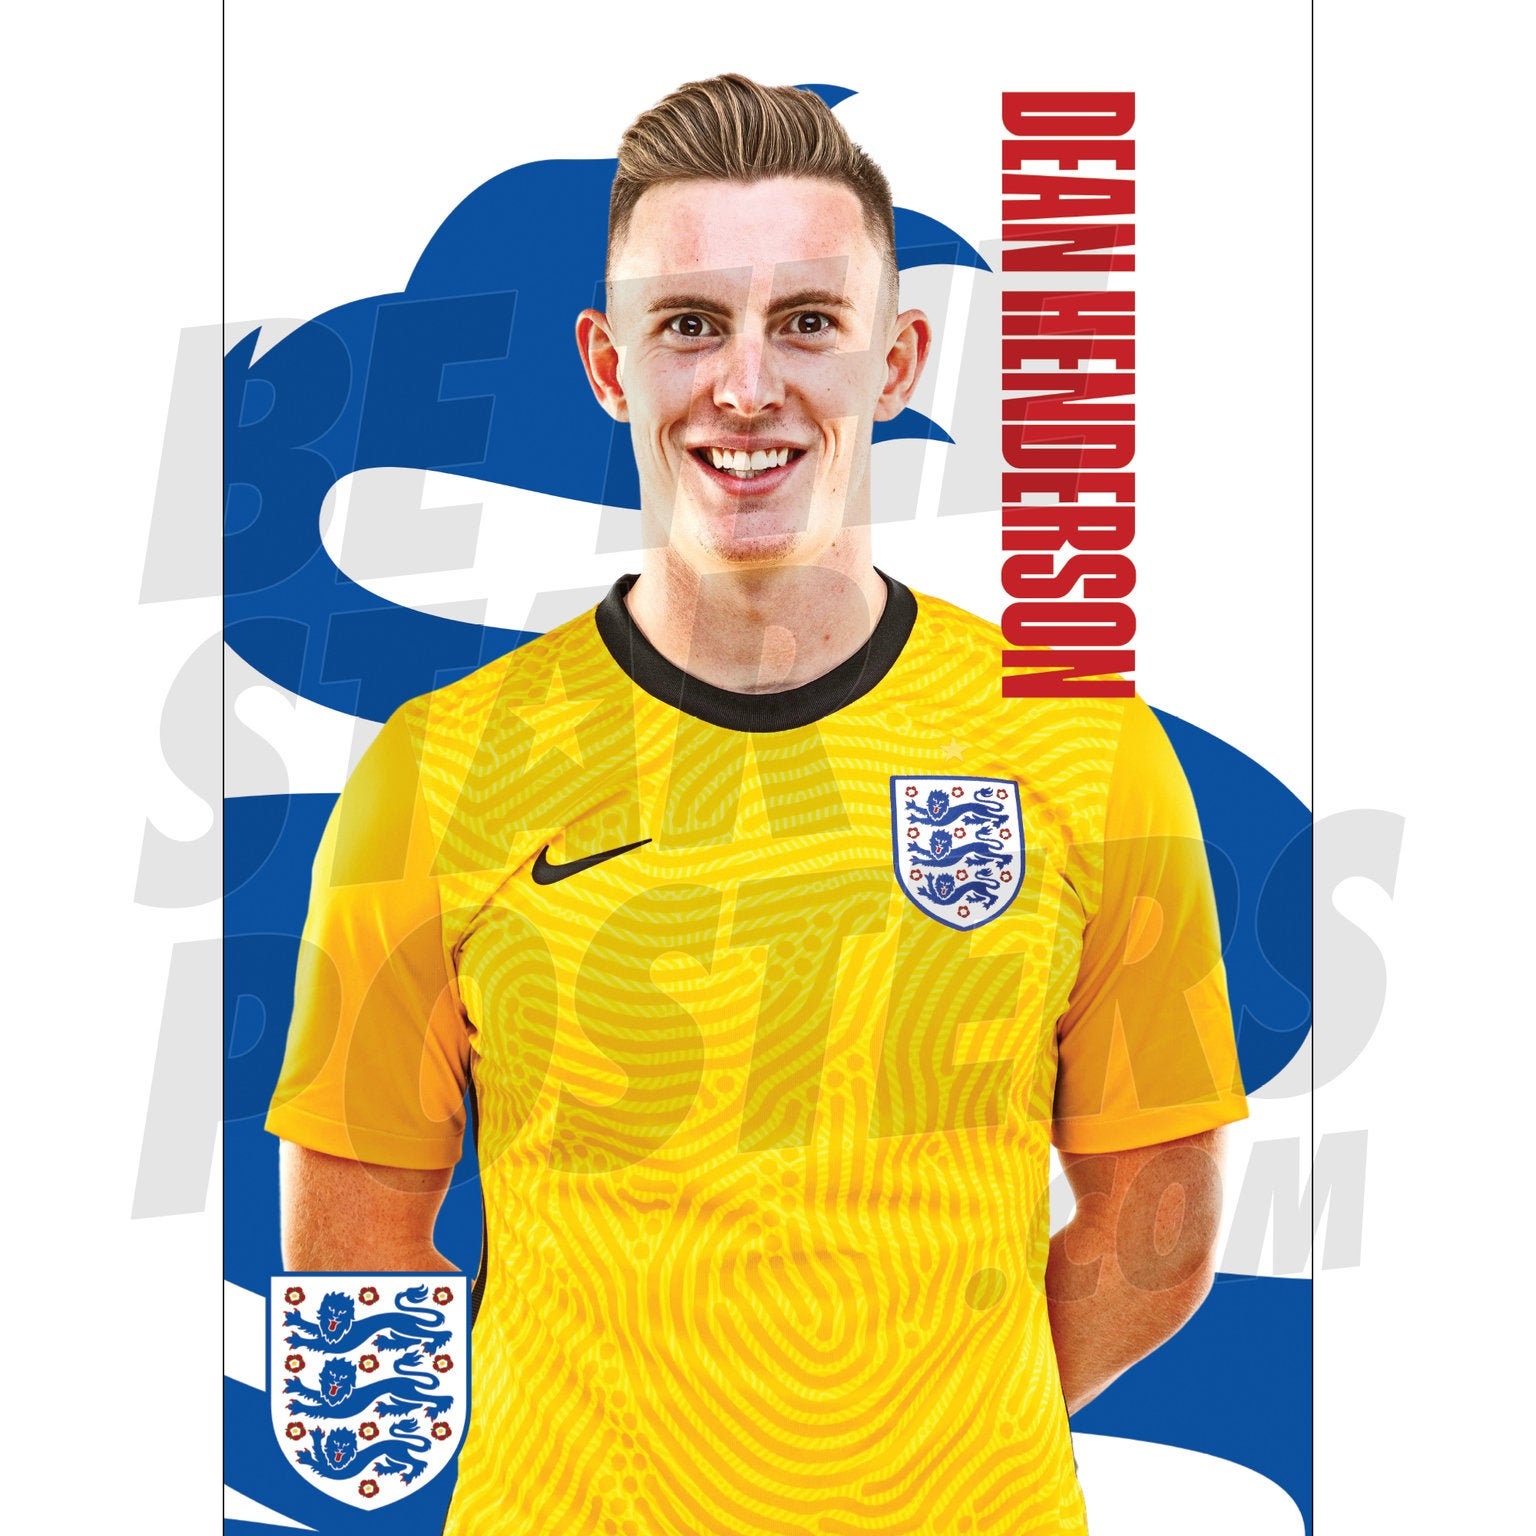 ENGLAND MENS FOOTBALL TEAM Ben Chilwell 20/21 Poster OFFICIALLY LICENSED A3